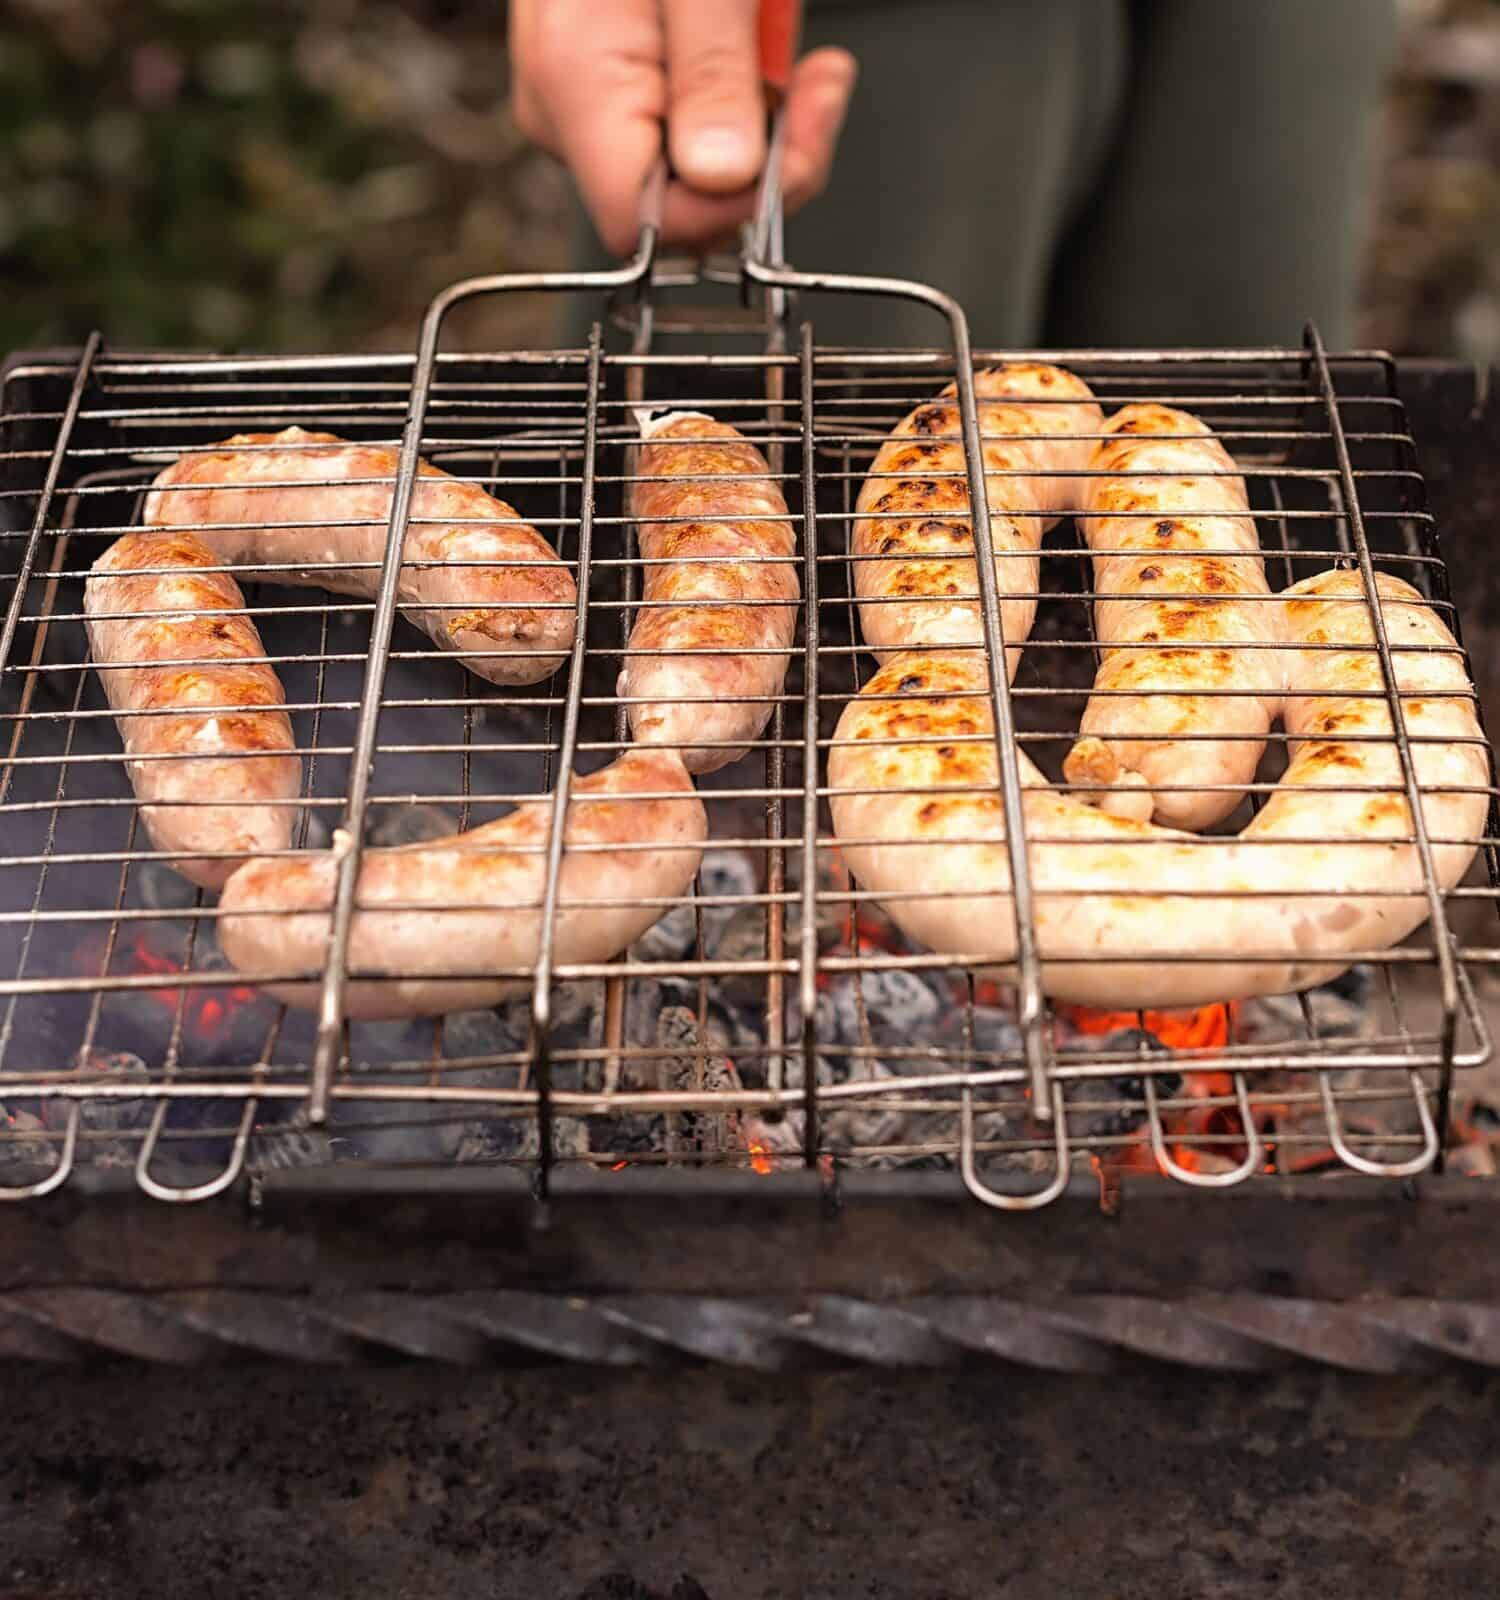 Pork and chicken sausages on the grill. Barbecue picnic in nature.